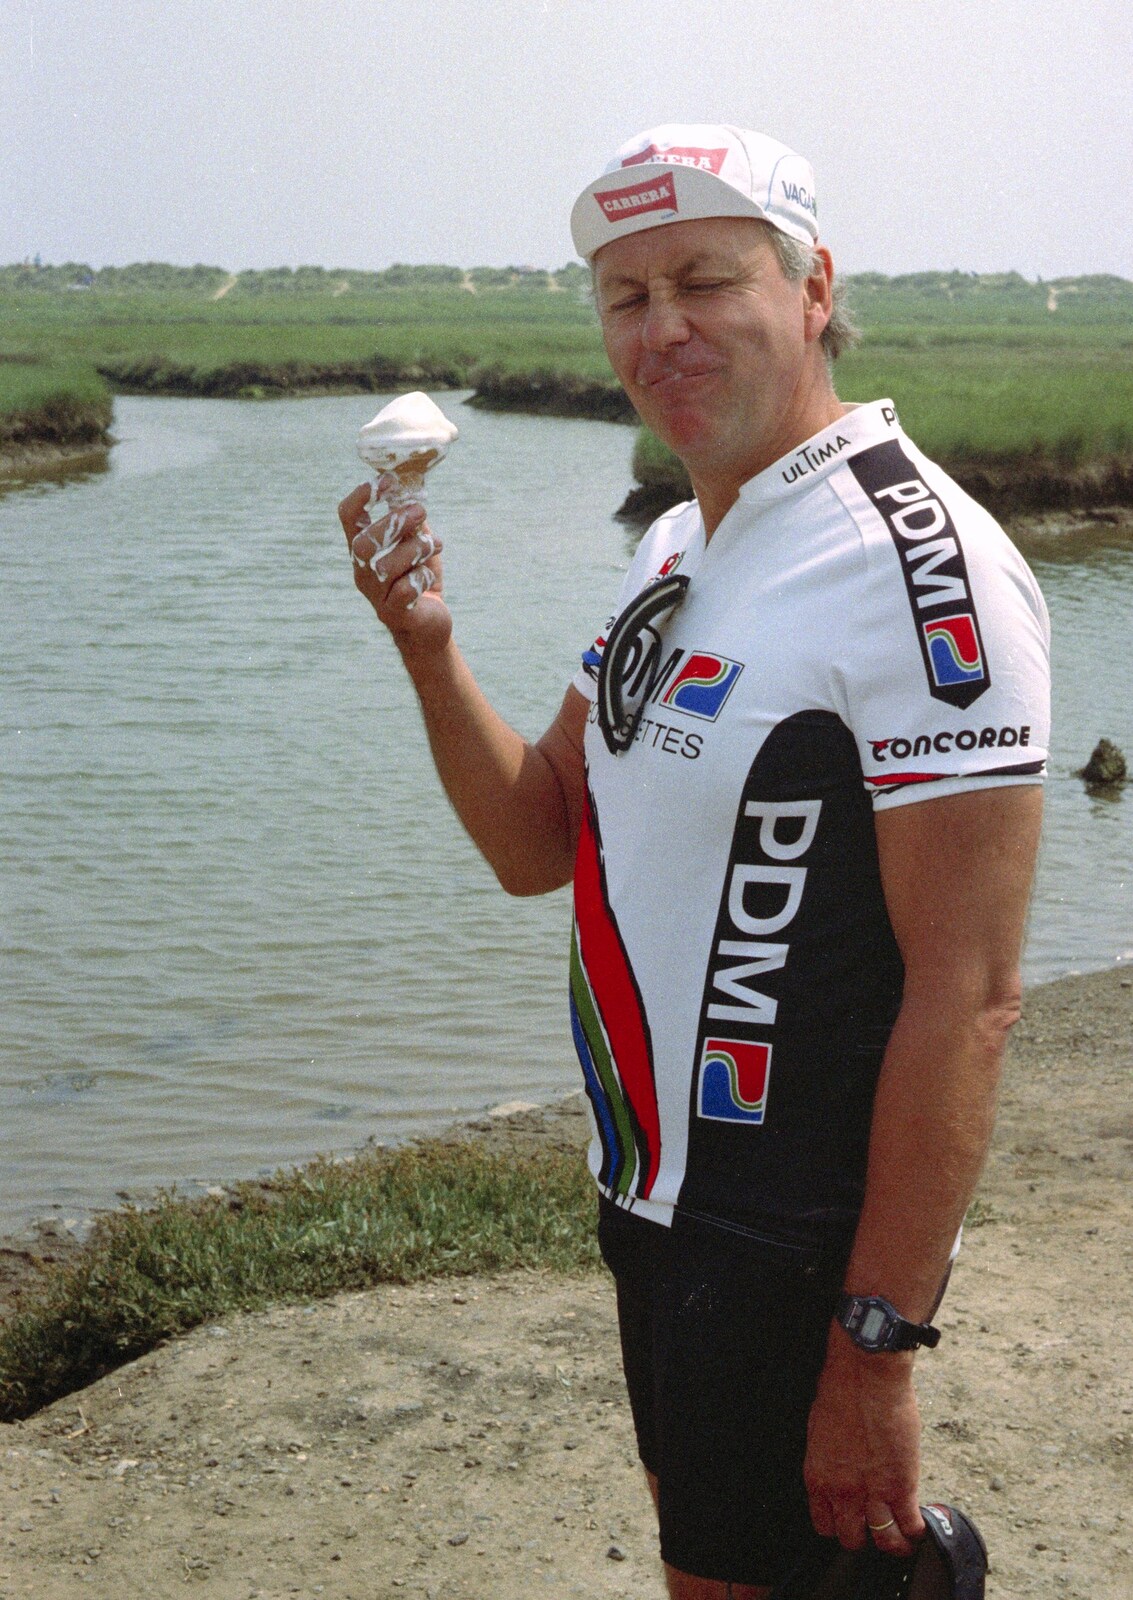 Keith eats melty ice-cream from BSCC at the Beach, Walberswick, Suffolk - 15th July 1997